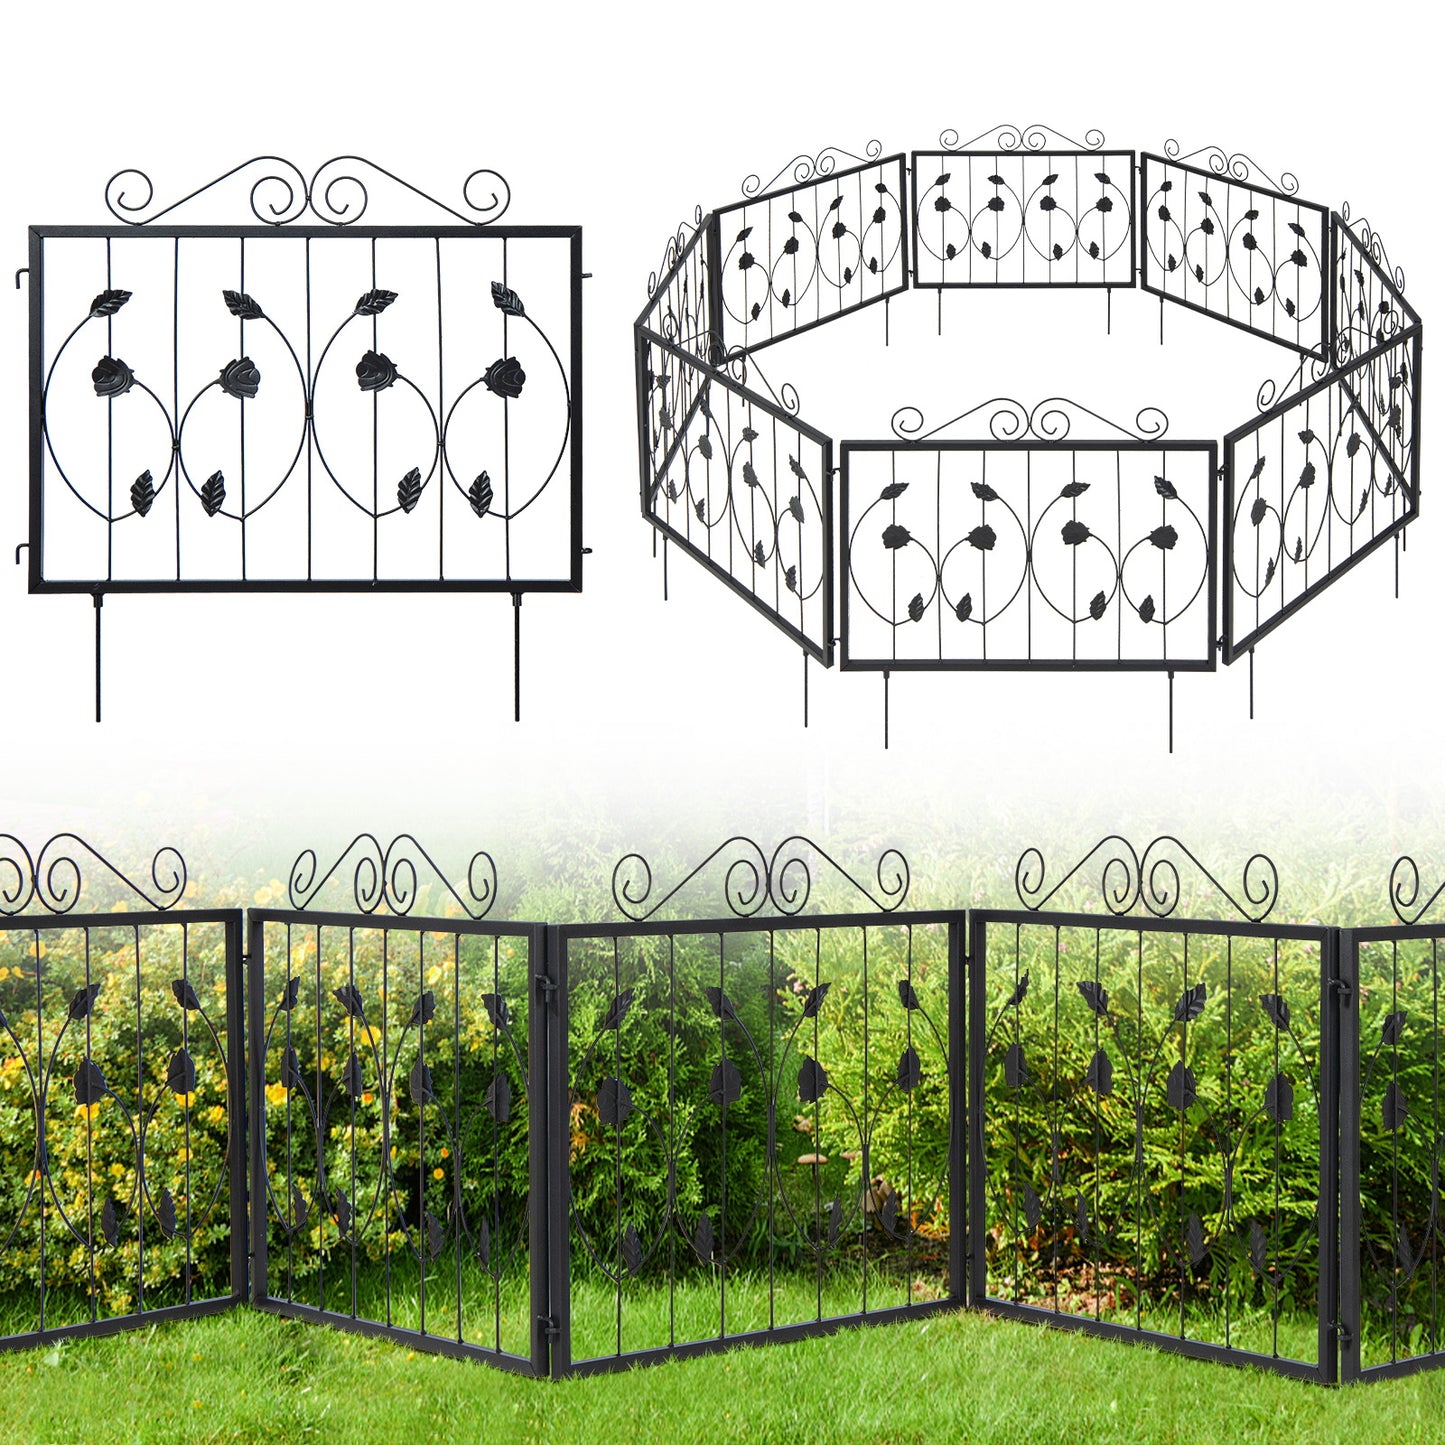 Decorative Garden Fence with 8 Panels Animal Barrier-Black